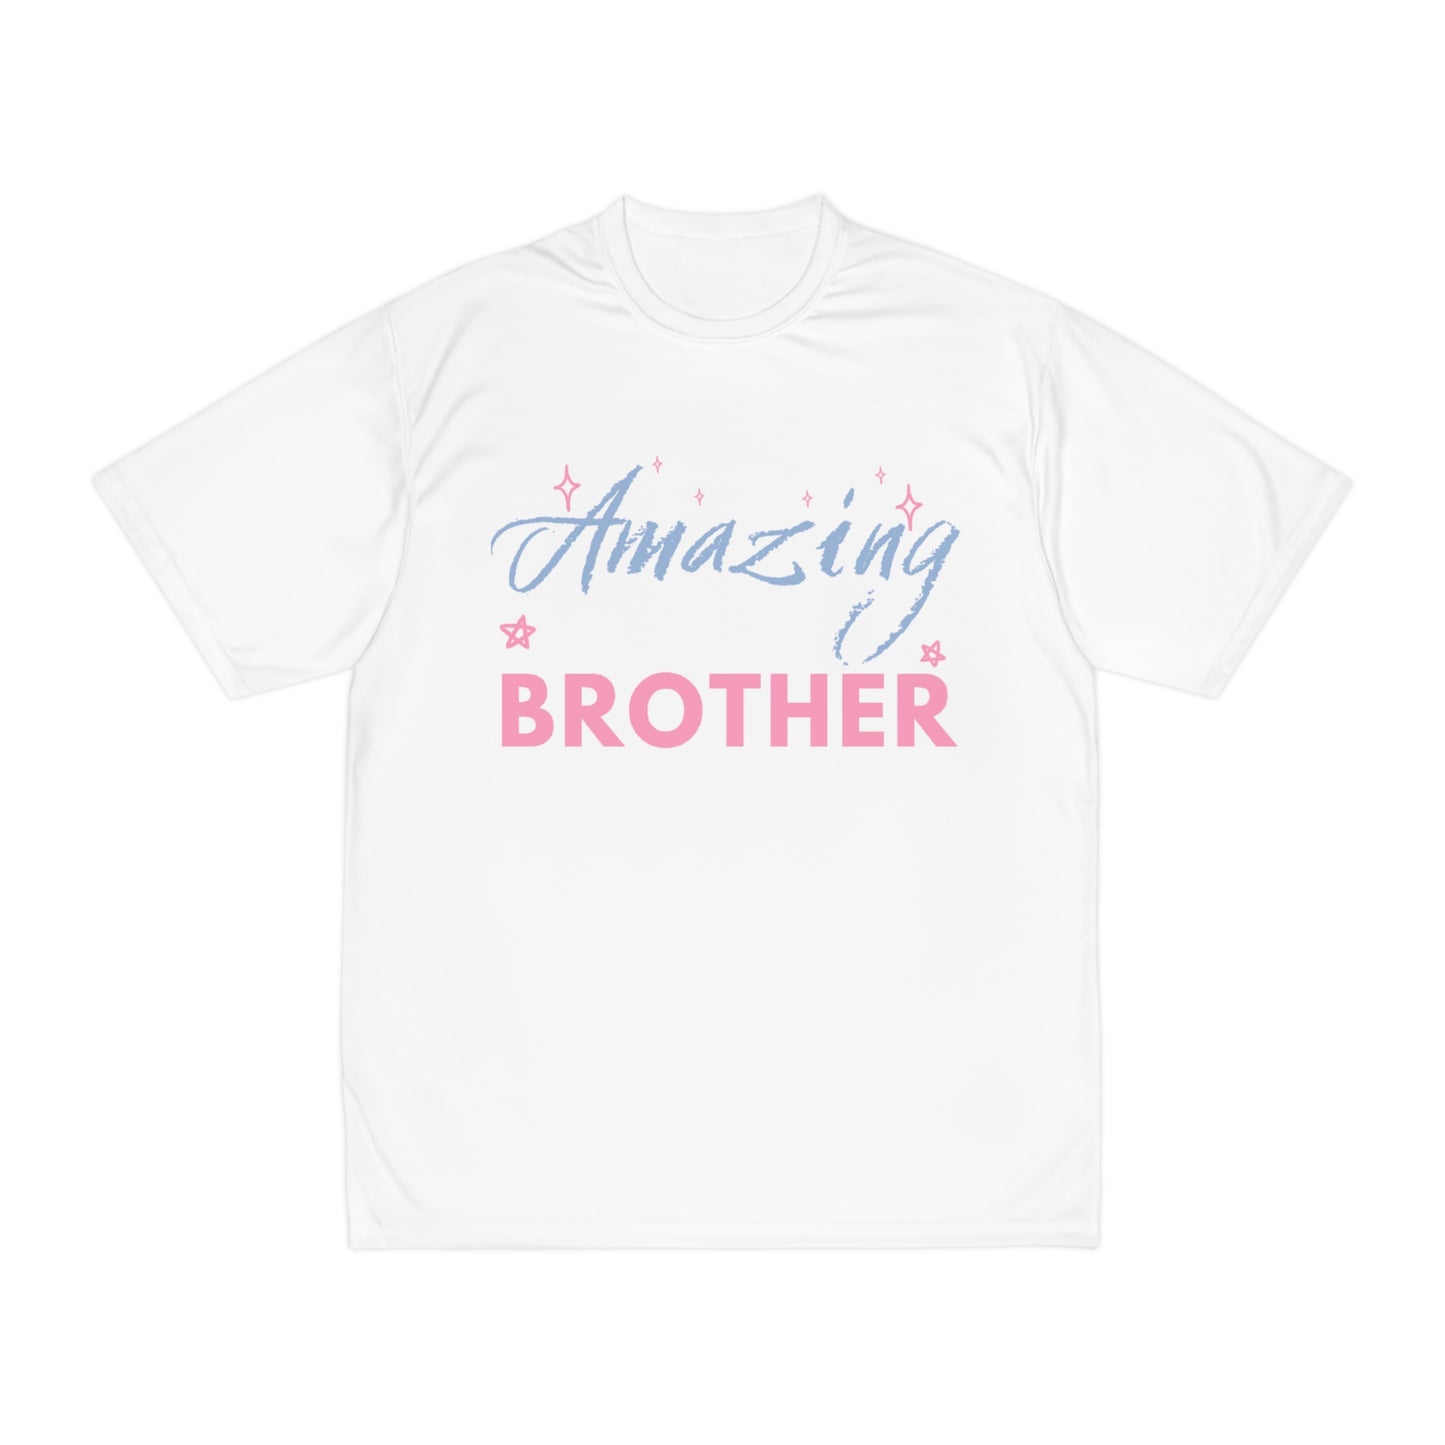 Amazing Brother Men's Performance T-Shirt